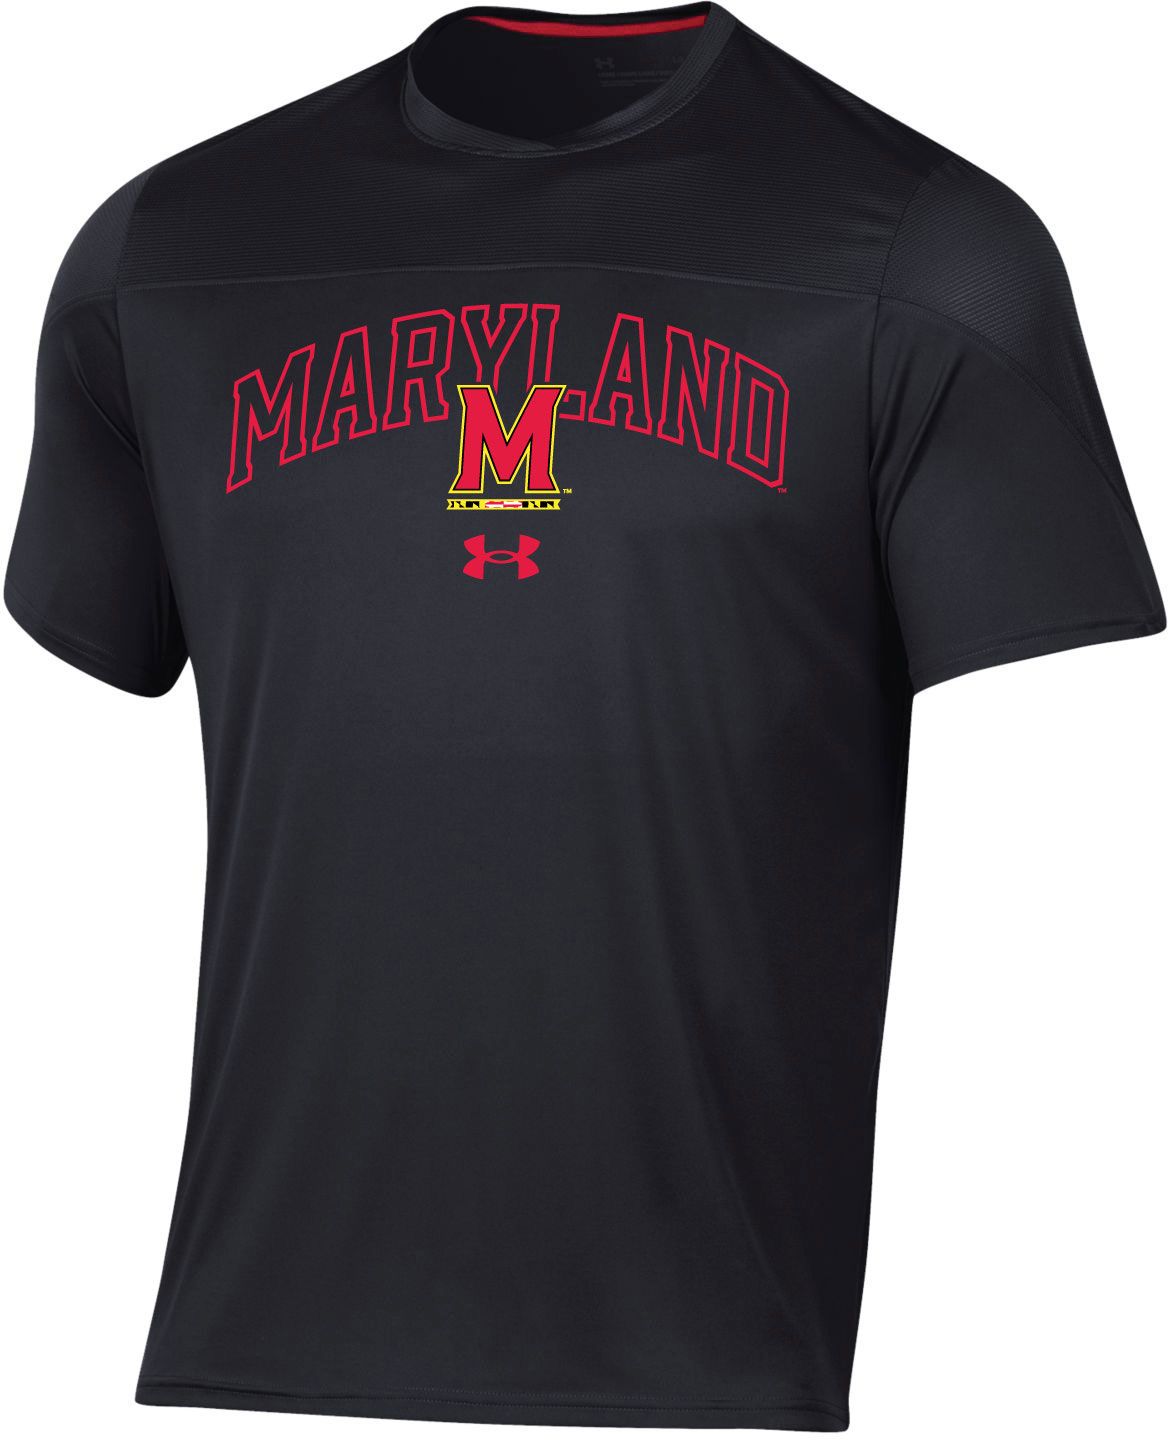 Maryland Terrapins track and field apparel